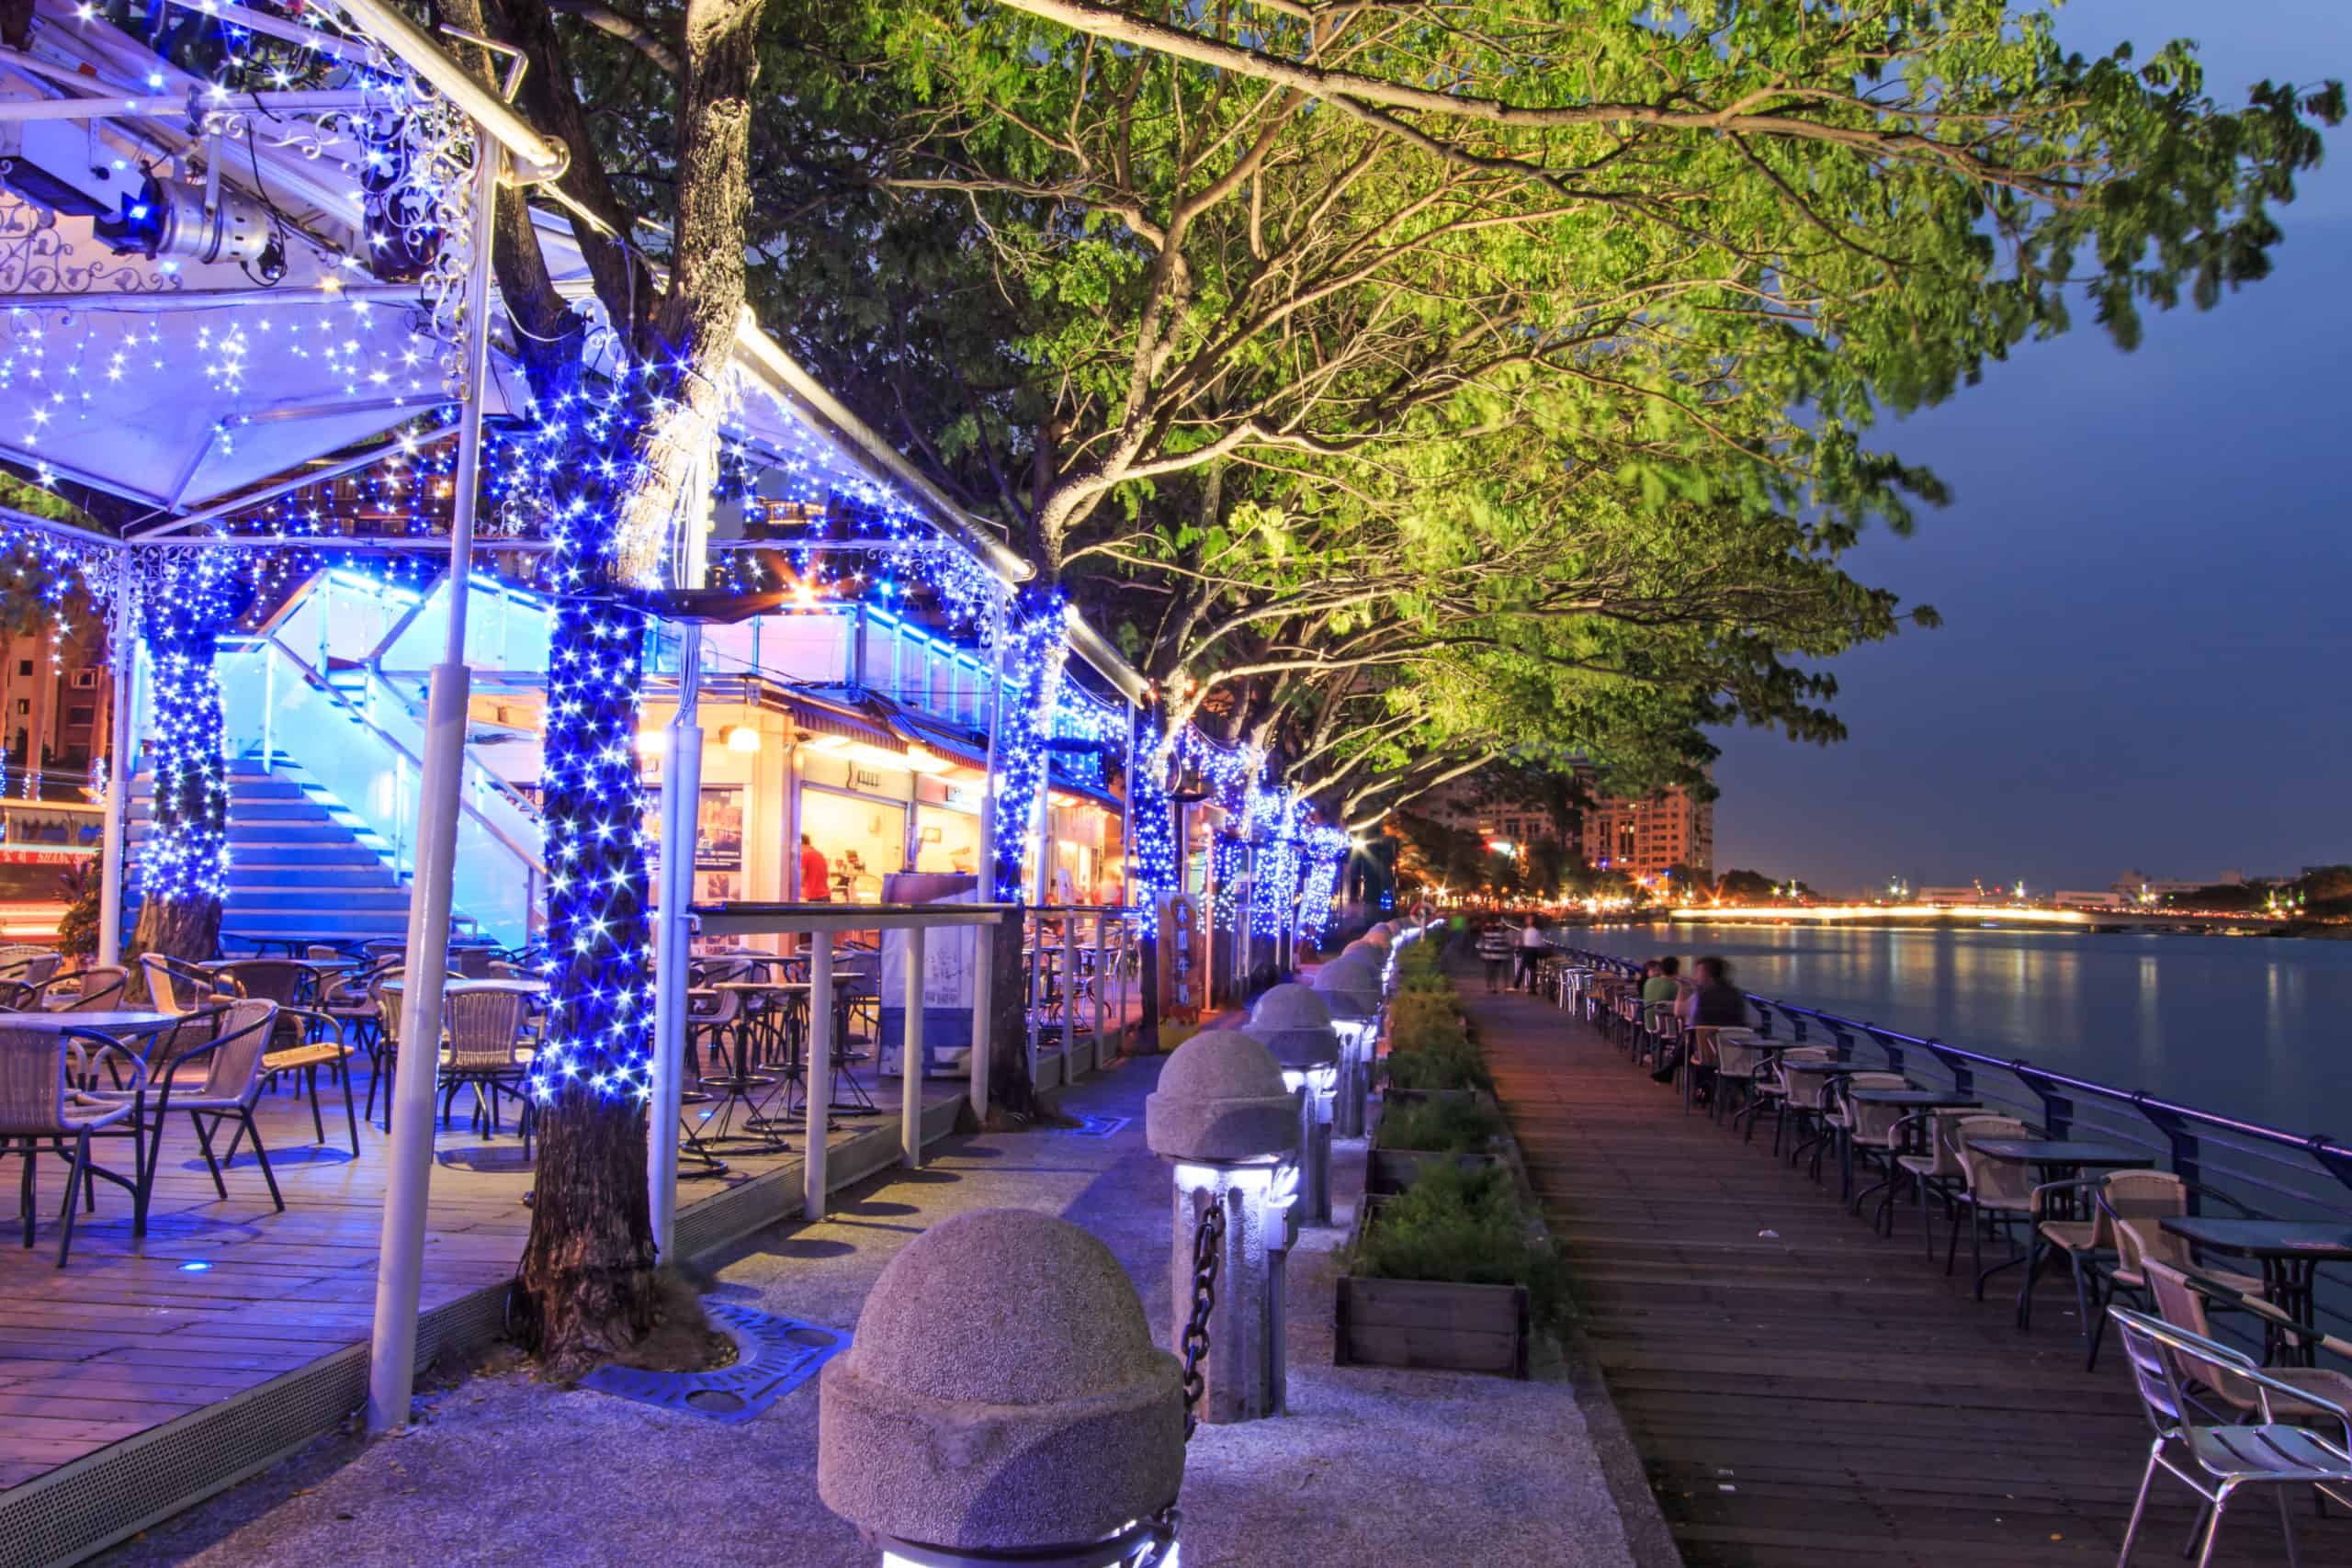 Outdoor Patio next to water with Blue string lights 